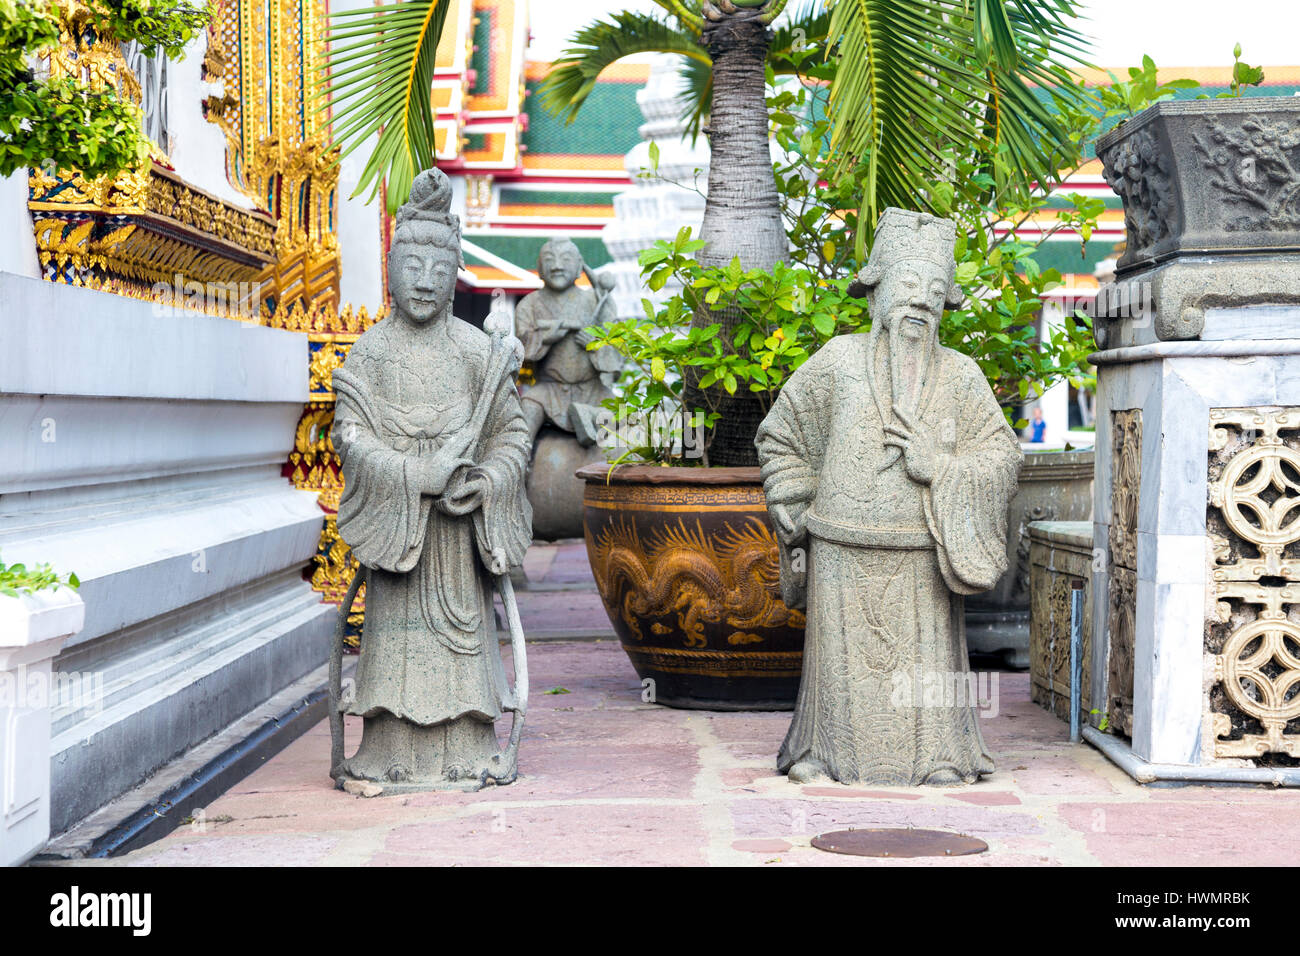 Small sculptures of people at Wat Pho Temple (Temple of the Reclining Buddha) in Bangkok, Thailand Stock Photo